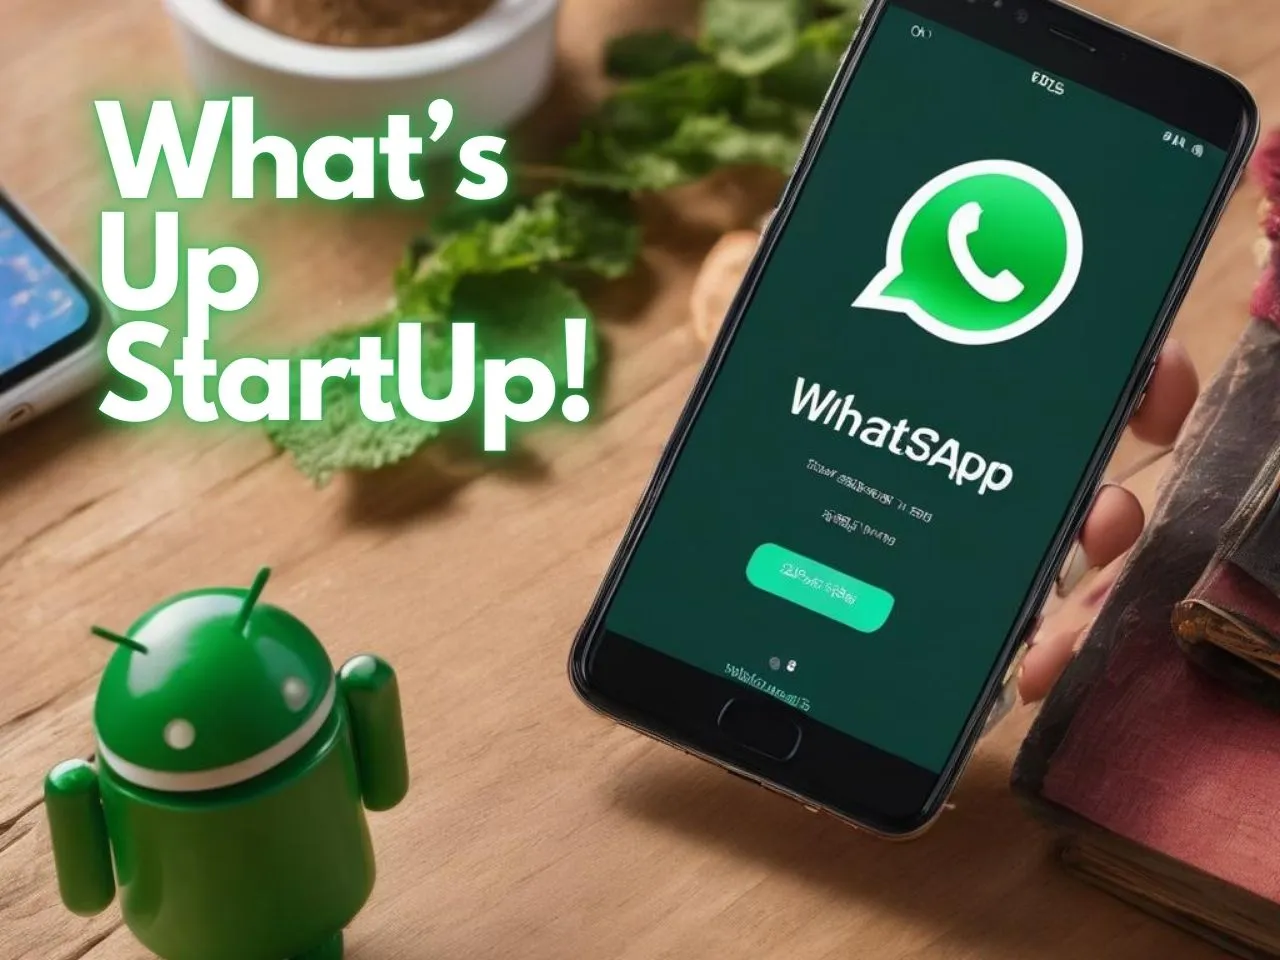 How WhatsApp's New Features Will Help Indian Startup Businesses?